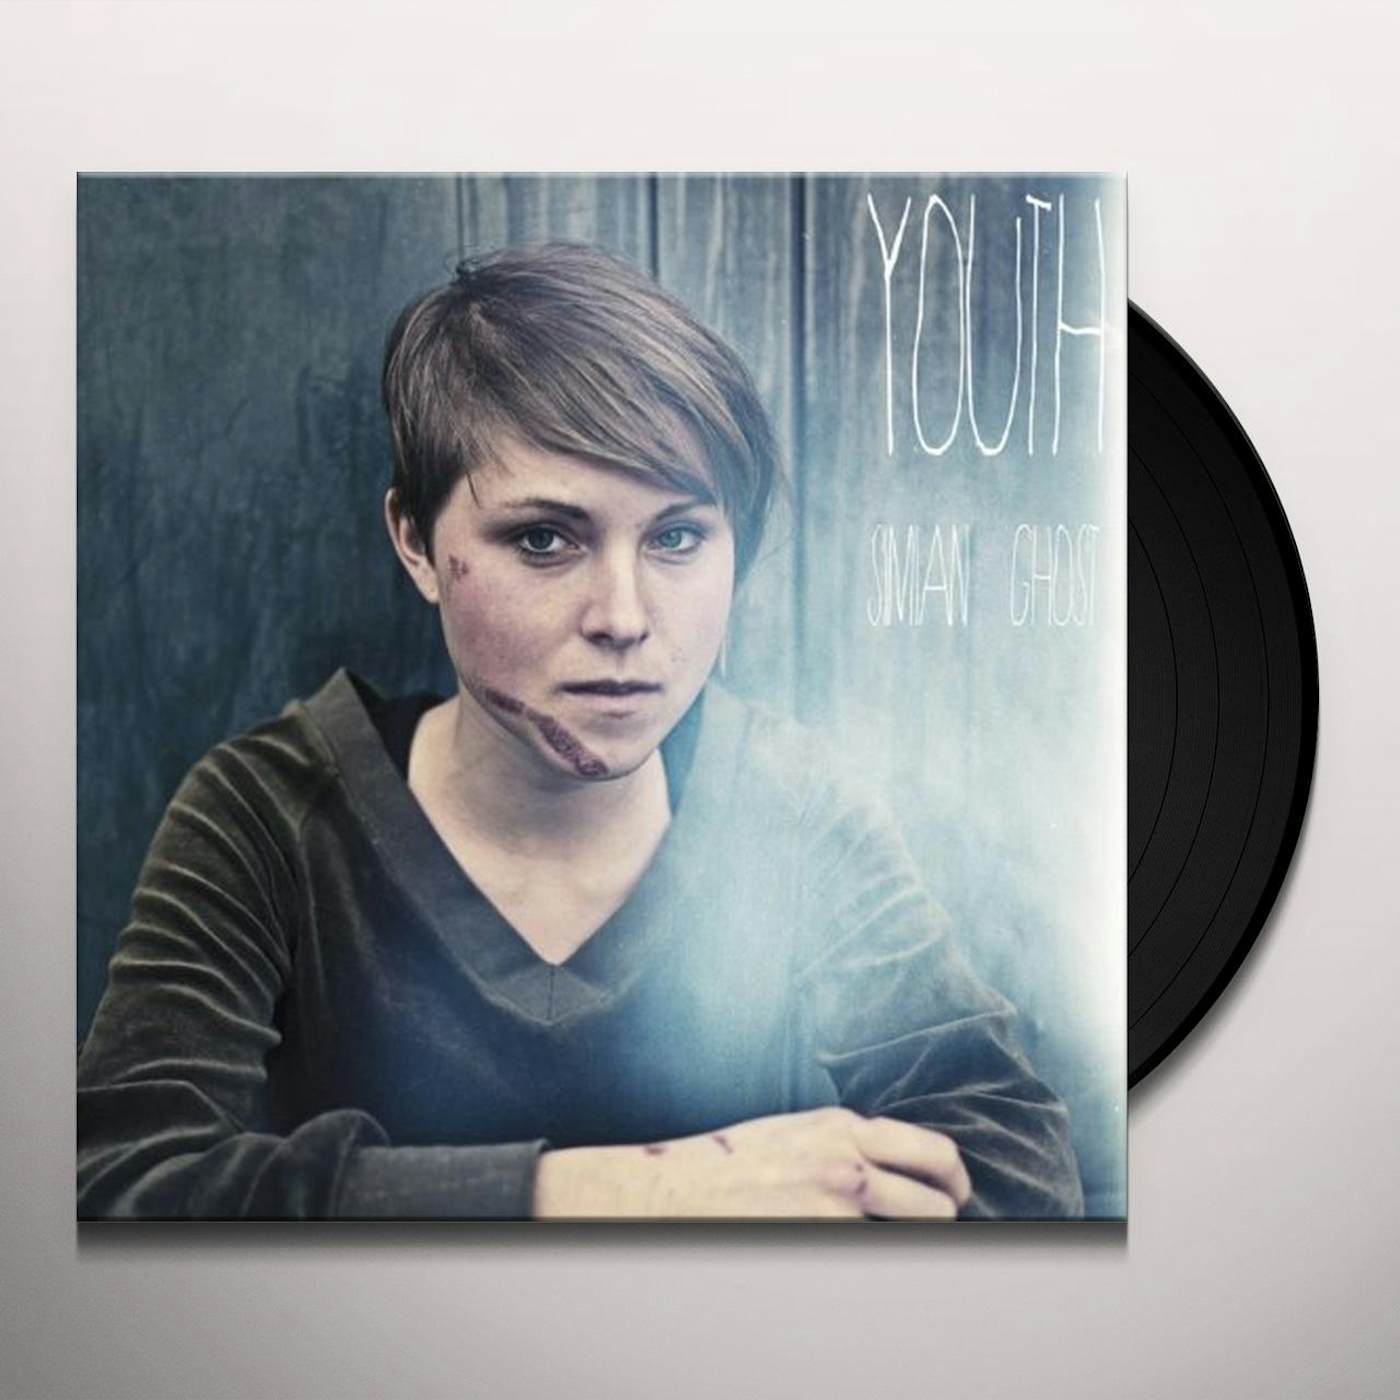 Simian Ghost YOUTH Vinyl Record - Sweden Release